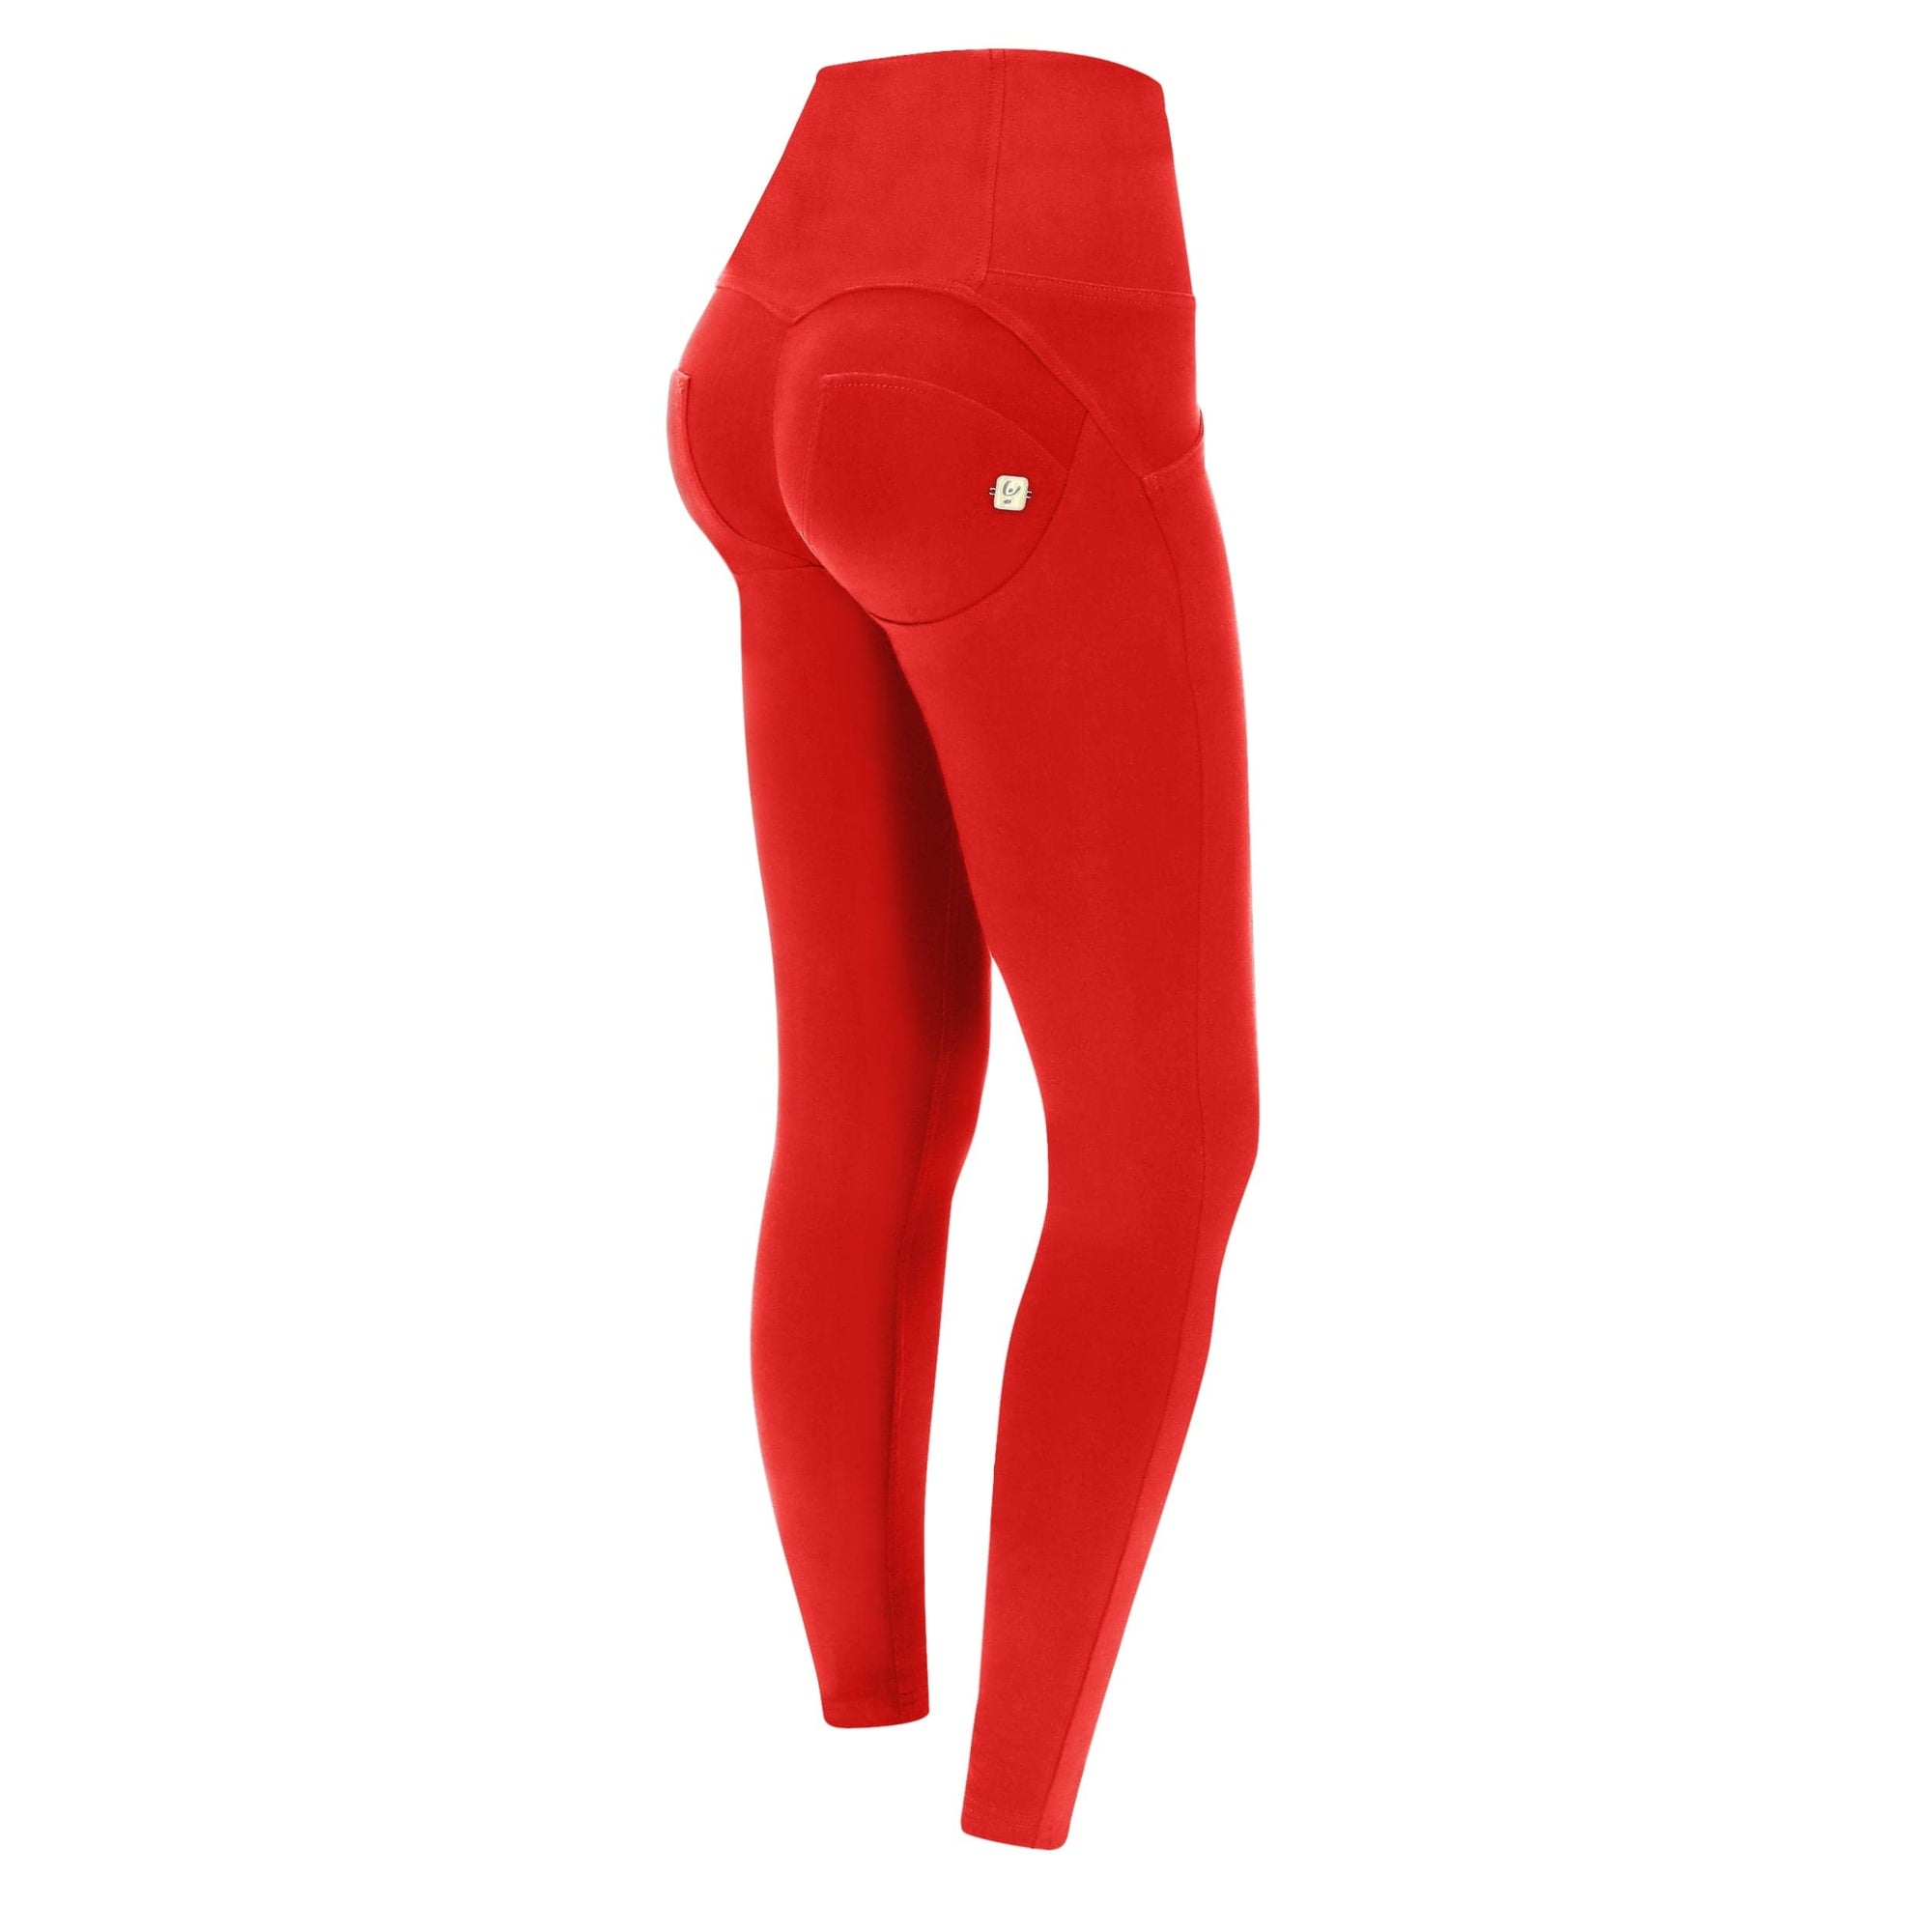 WR.UP® shaping trousers - High waist - Full Length - Chili Pepper 1